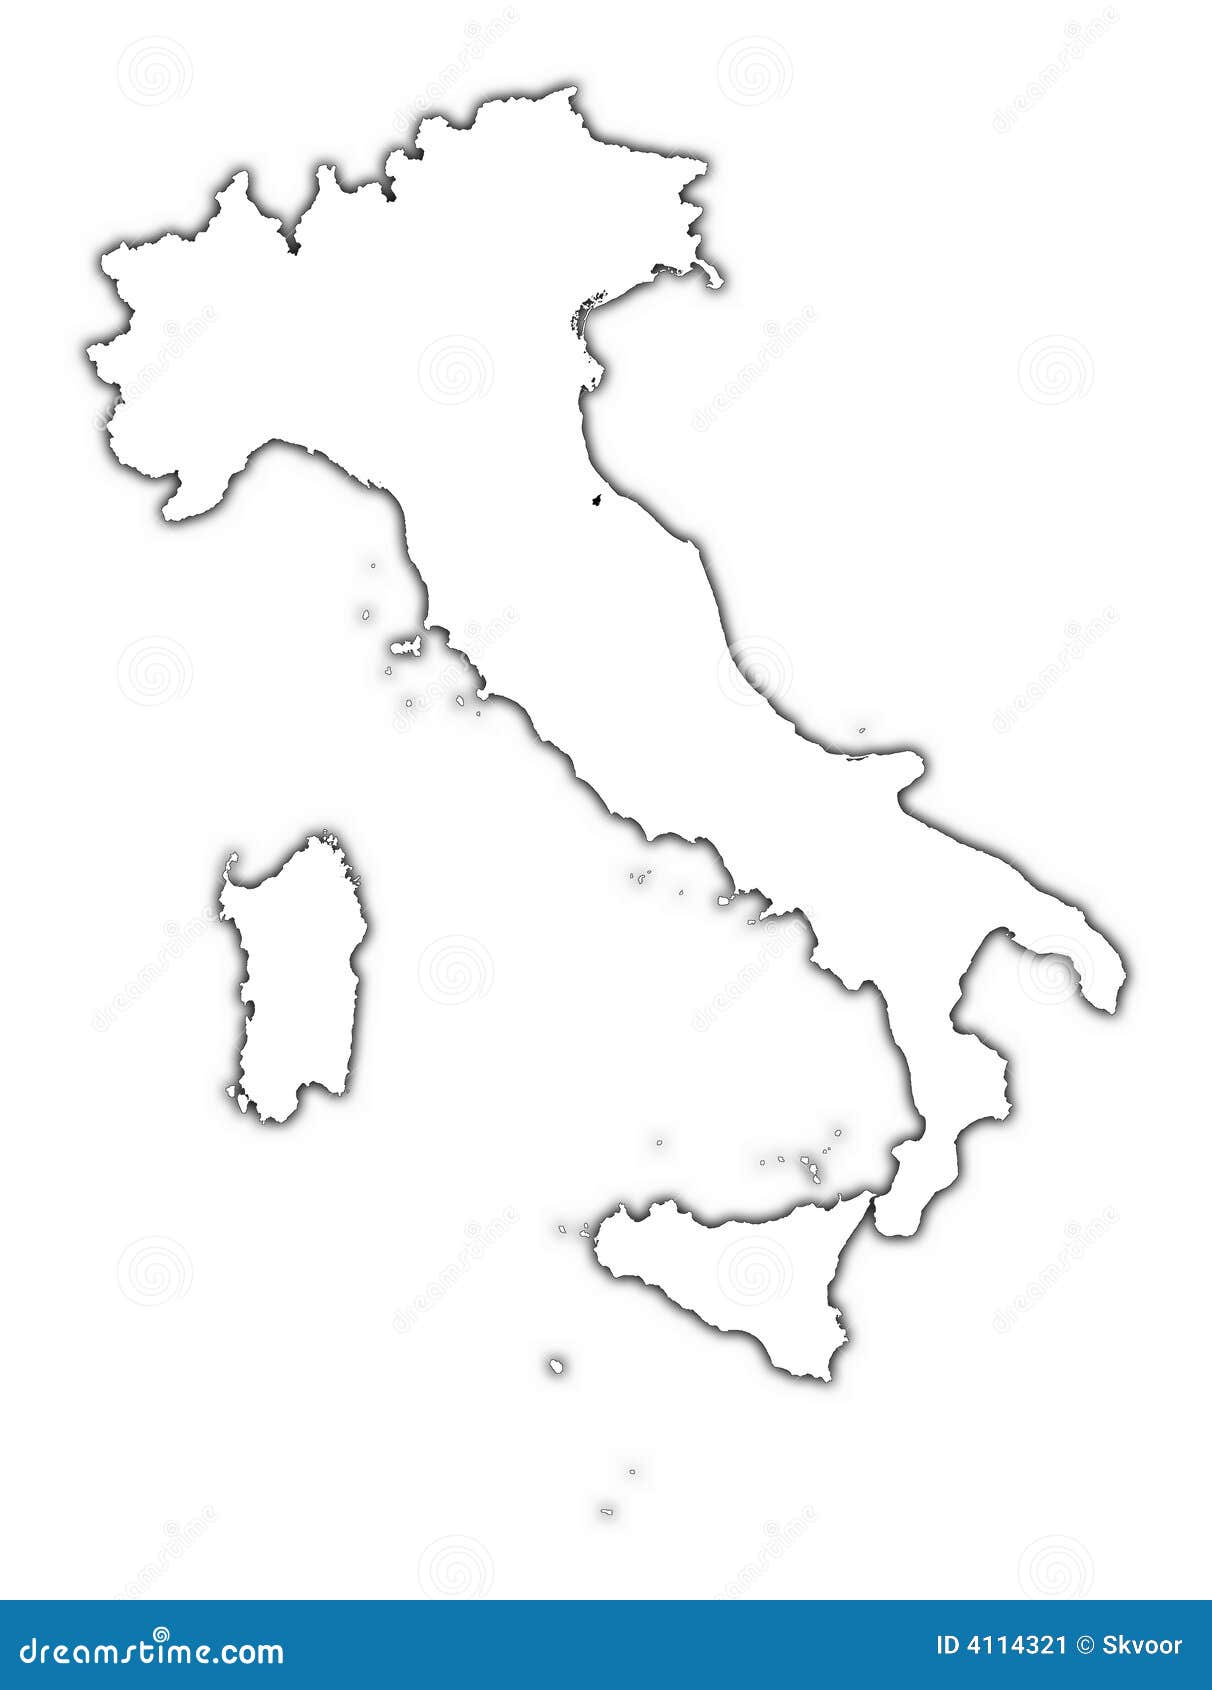 italy-outline-map-with-shadow-stock-illustration-illustration-of